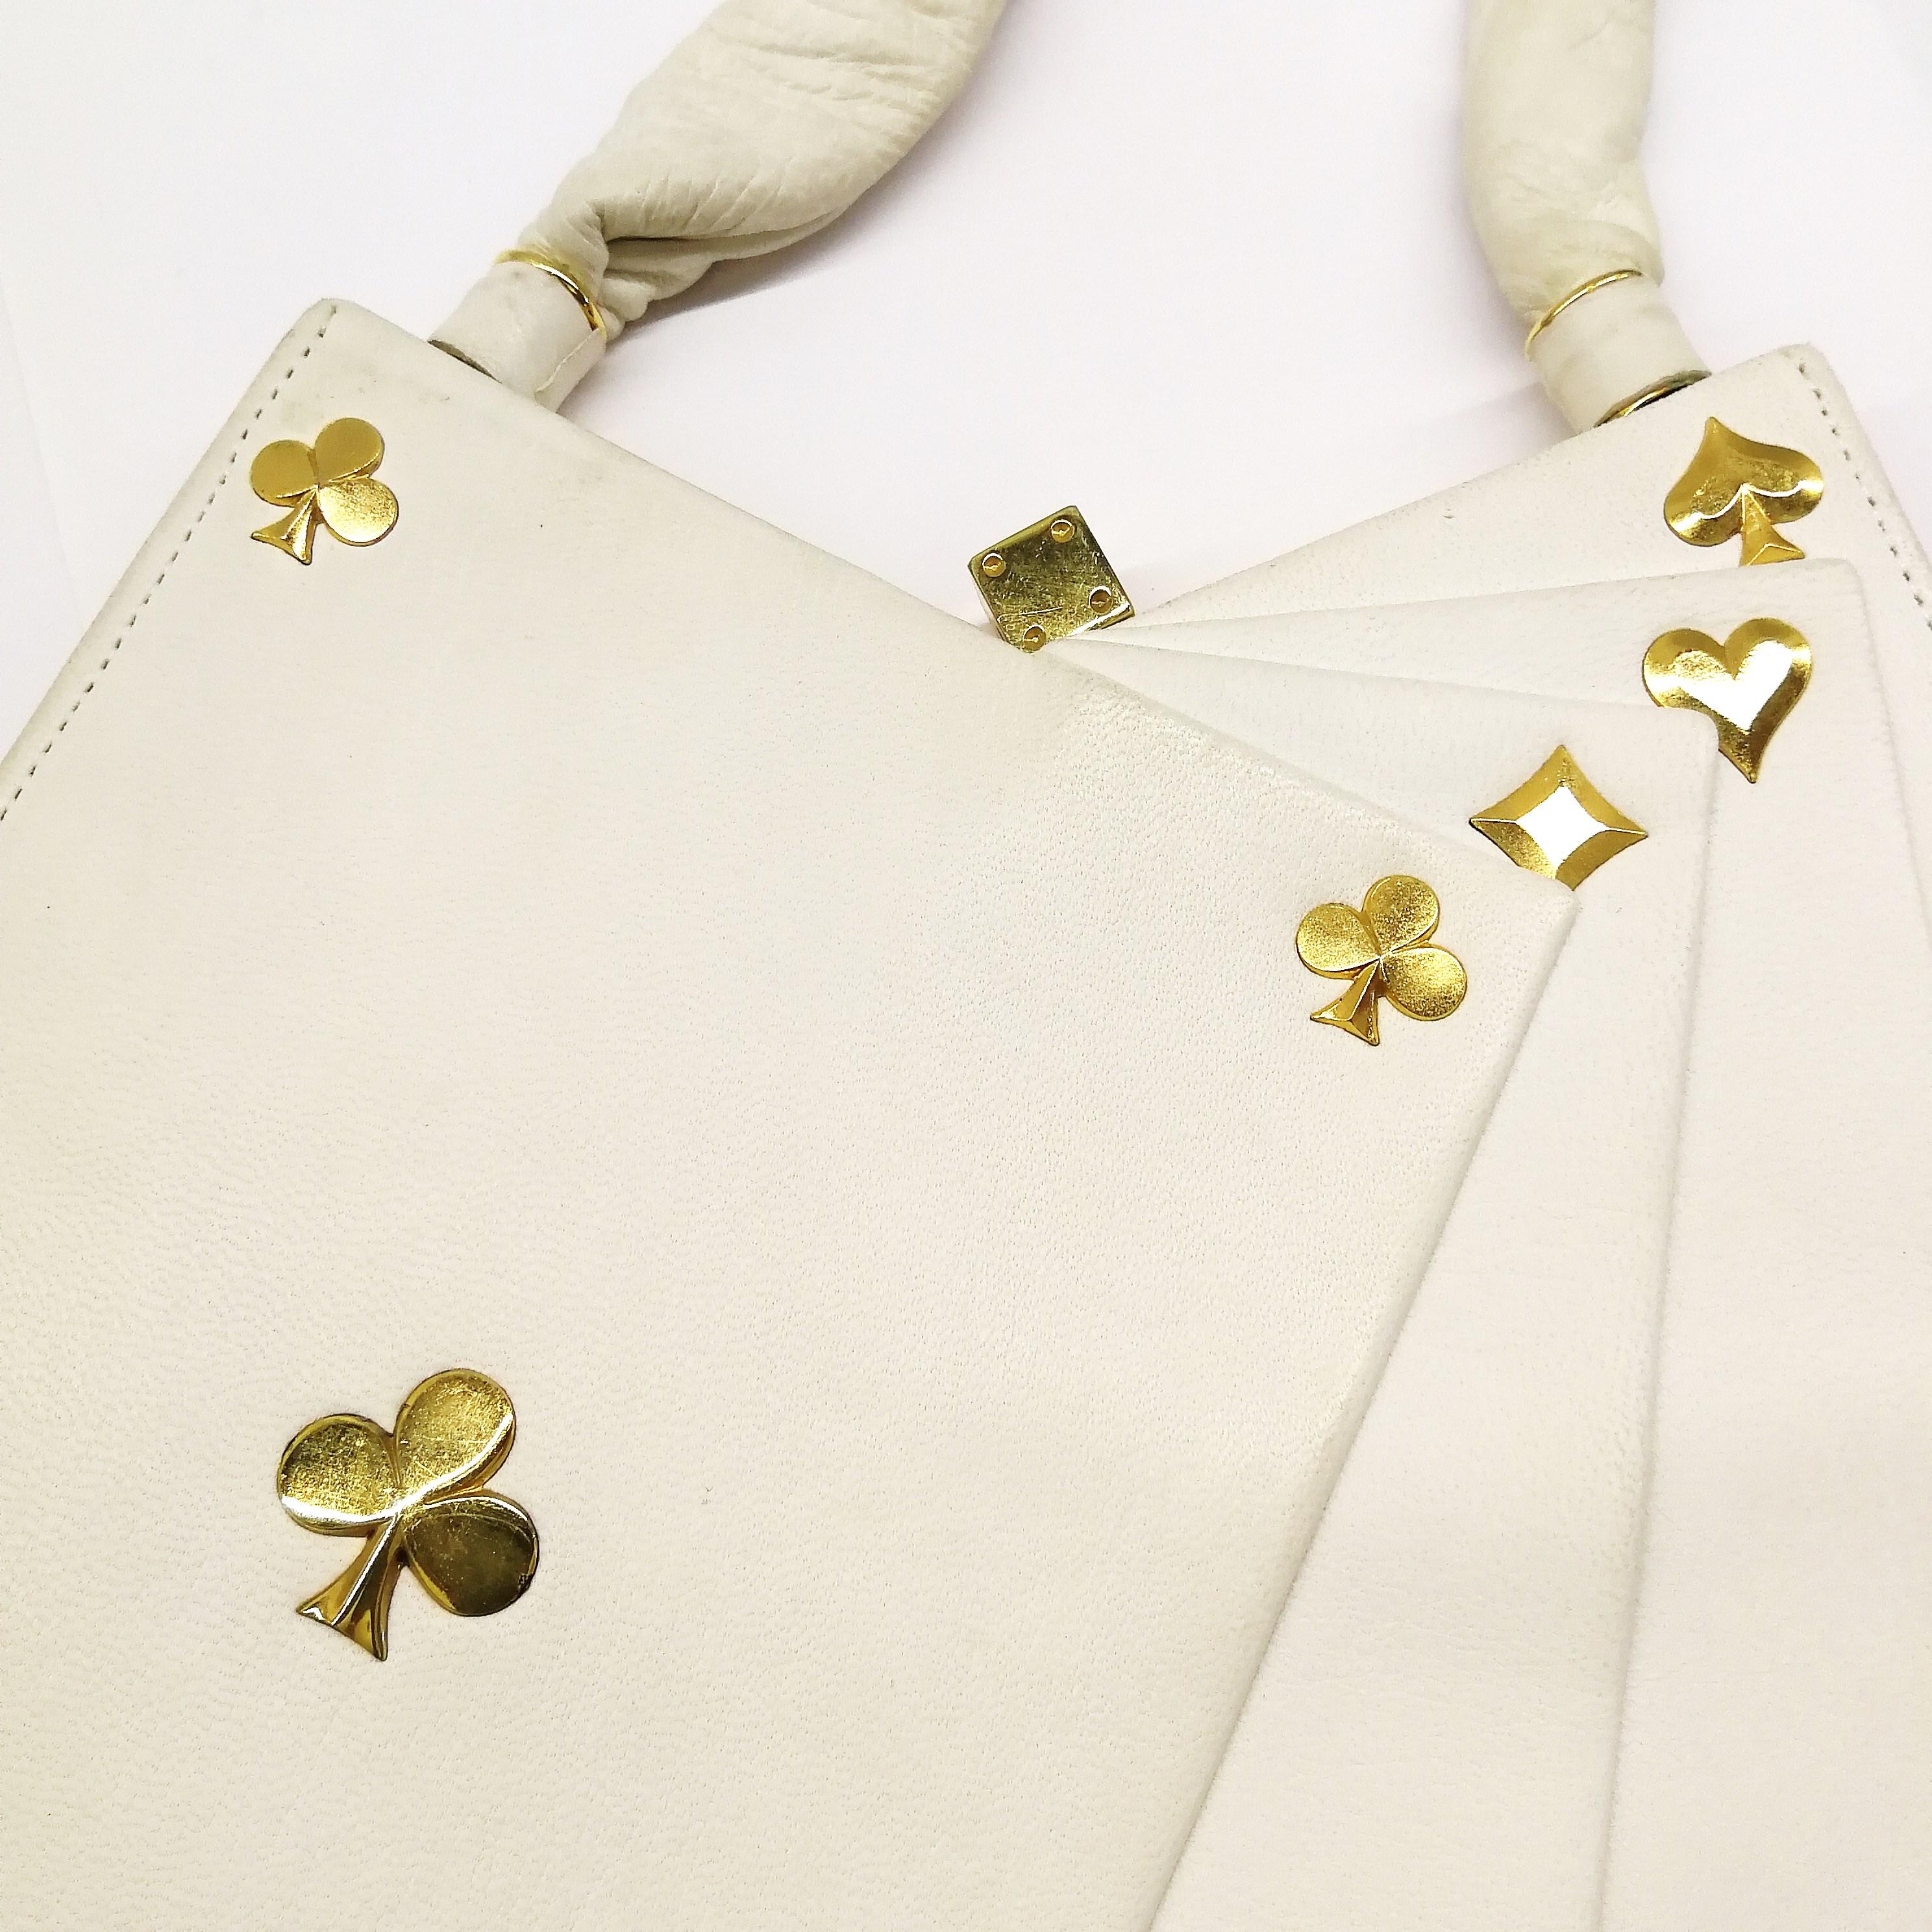 Exquisite Anne-Marie of Paris white leather and gilt 'Hand of Cards' handbag. 2